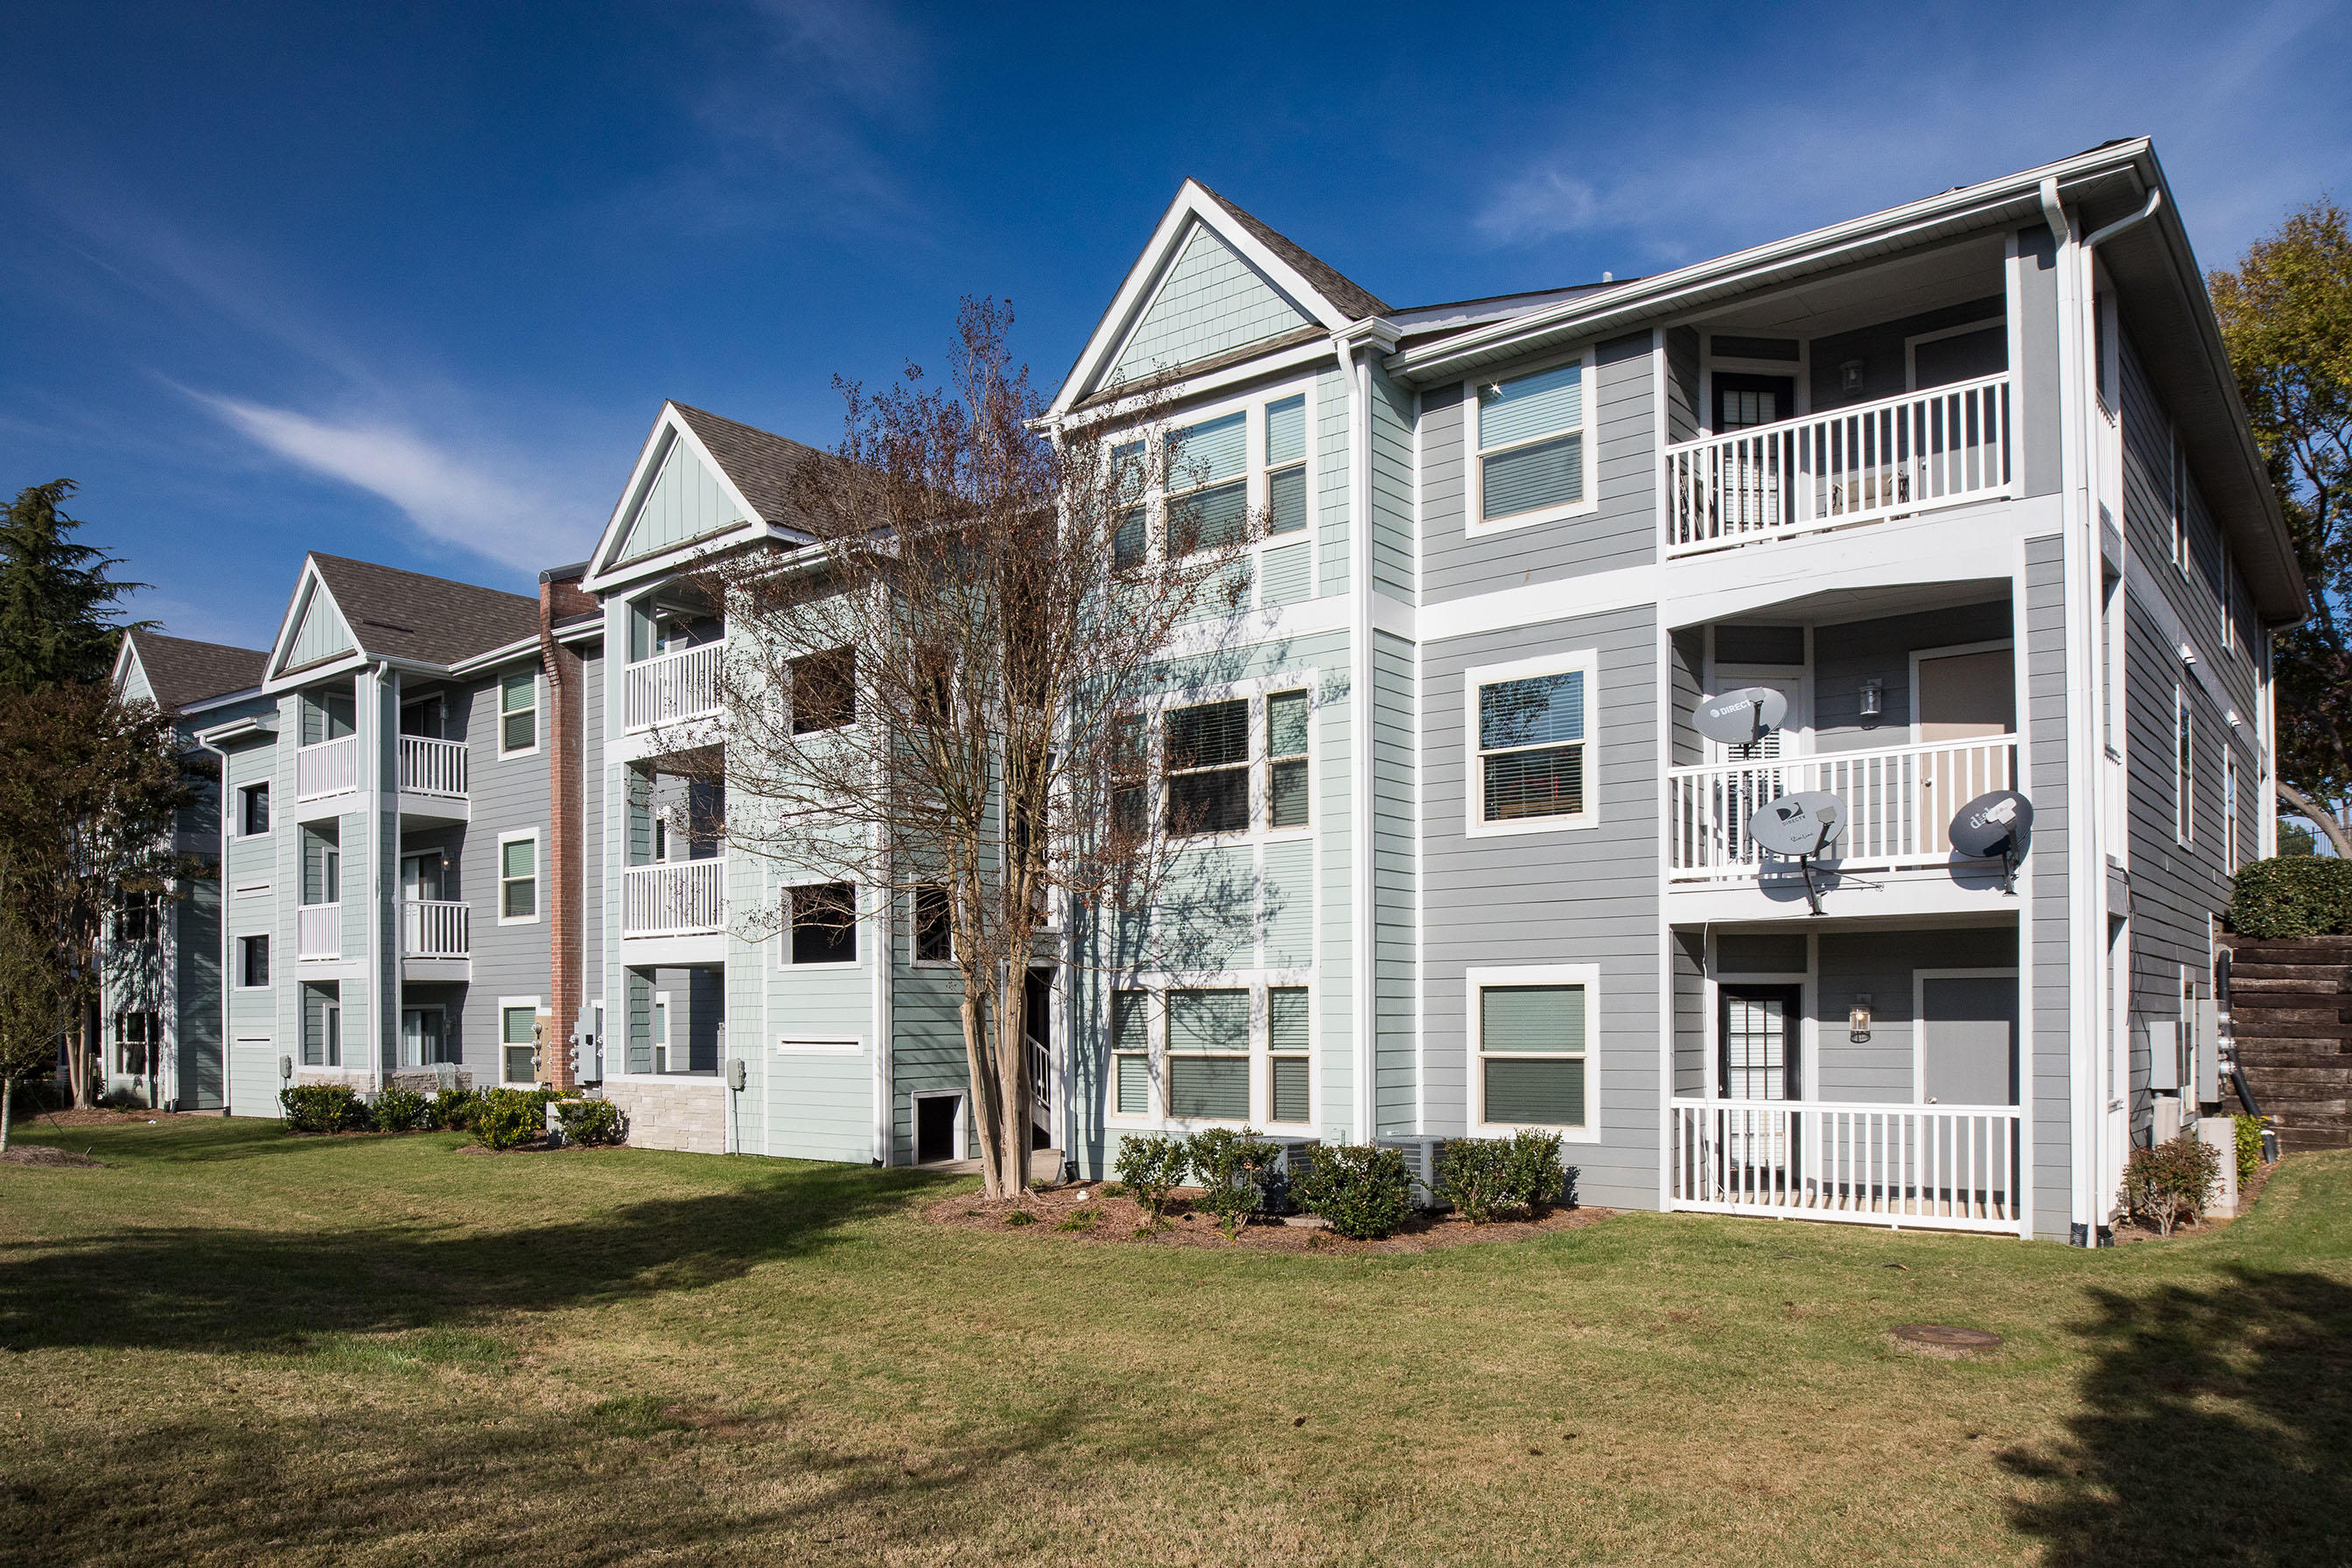 Jobs at apartment complexes in charlotte nc